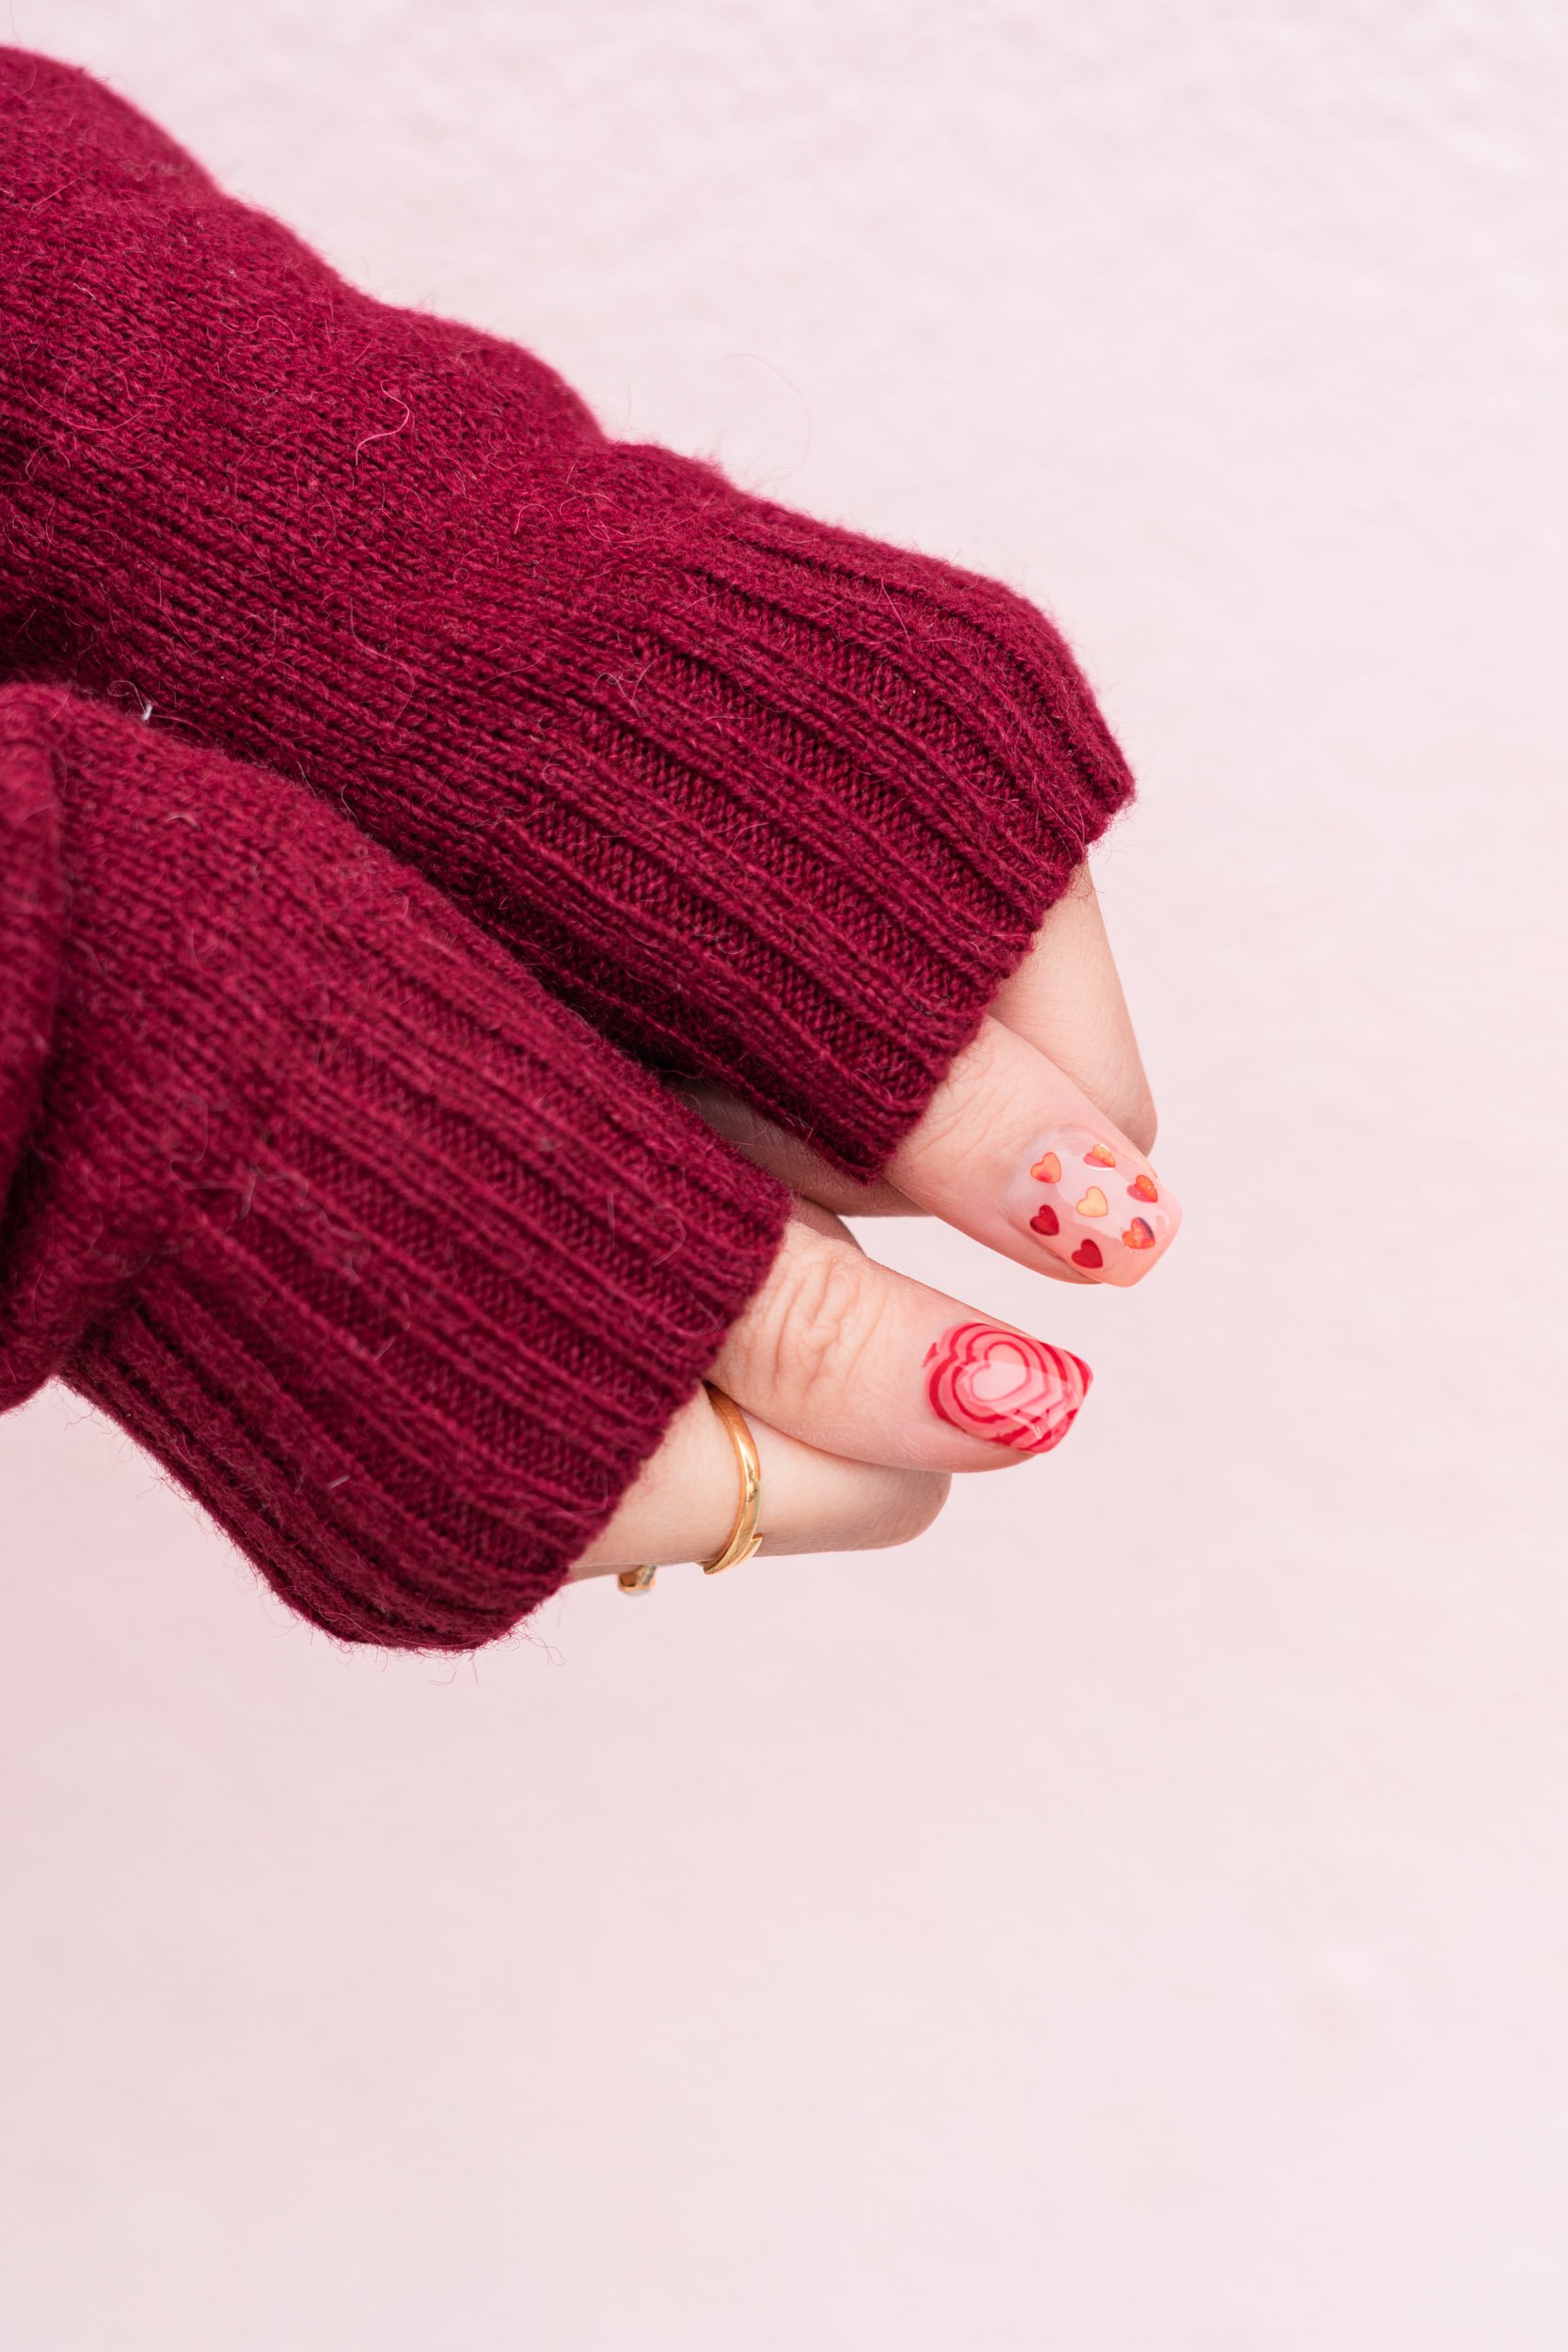 Valentine’s Day Nails: Pinking of You — Becoming Carmen